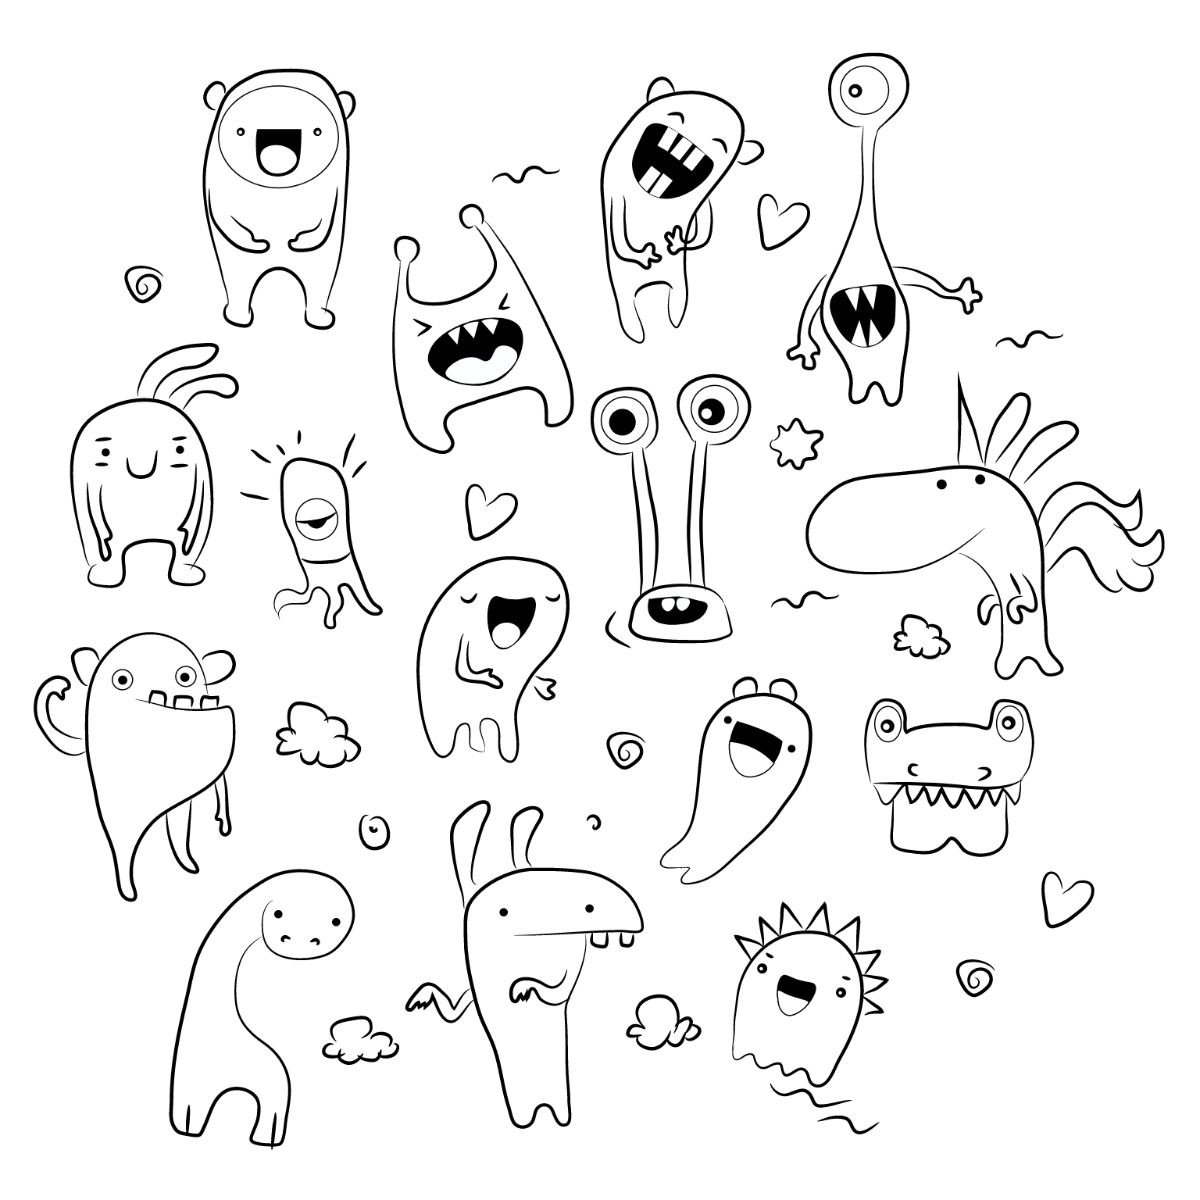 Doodle Character Vector Template